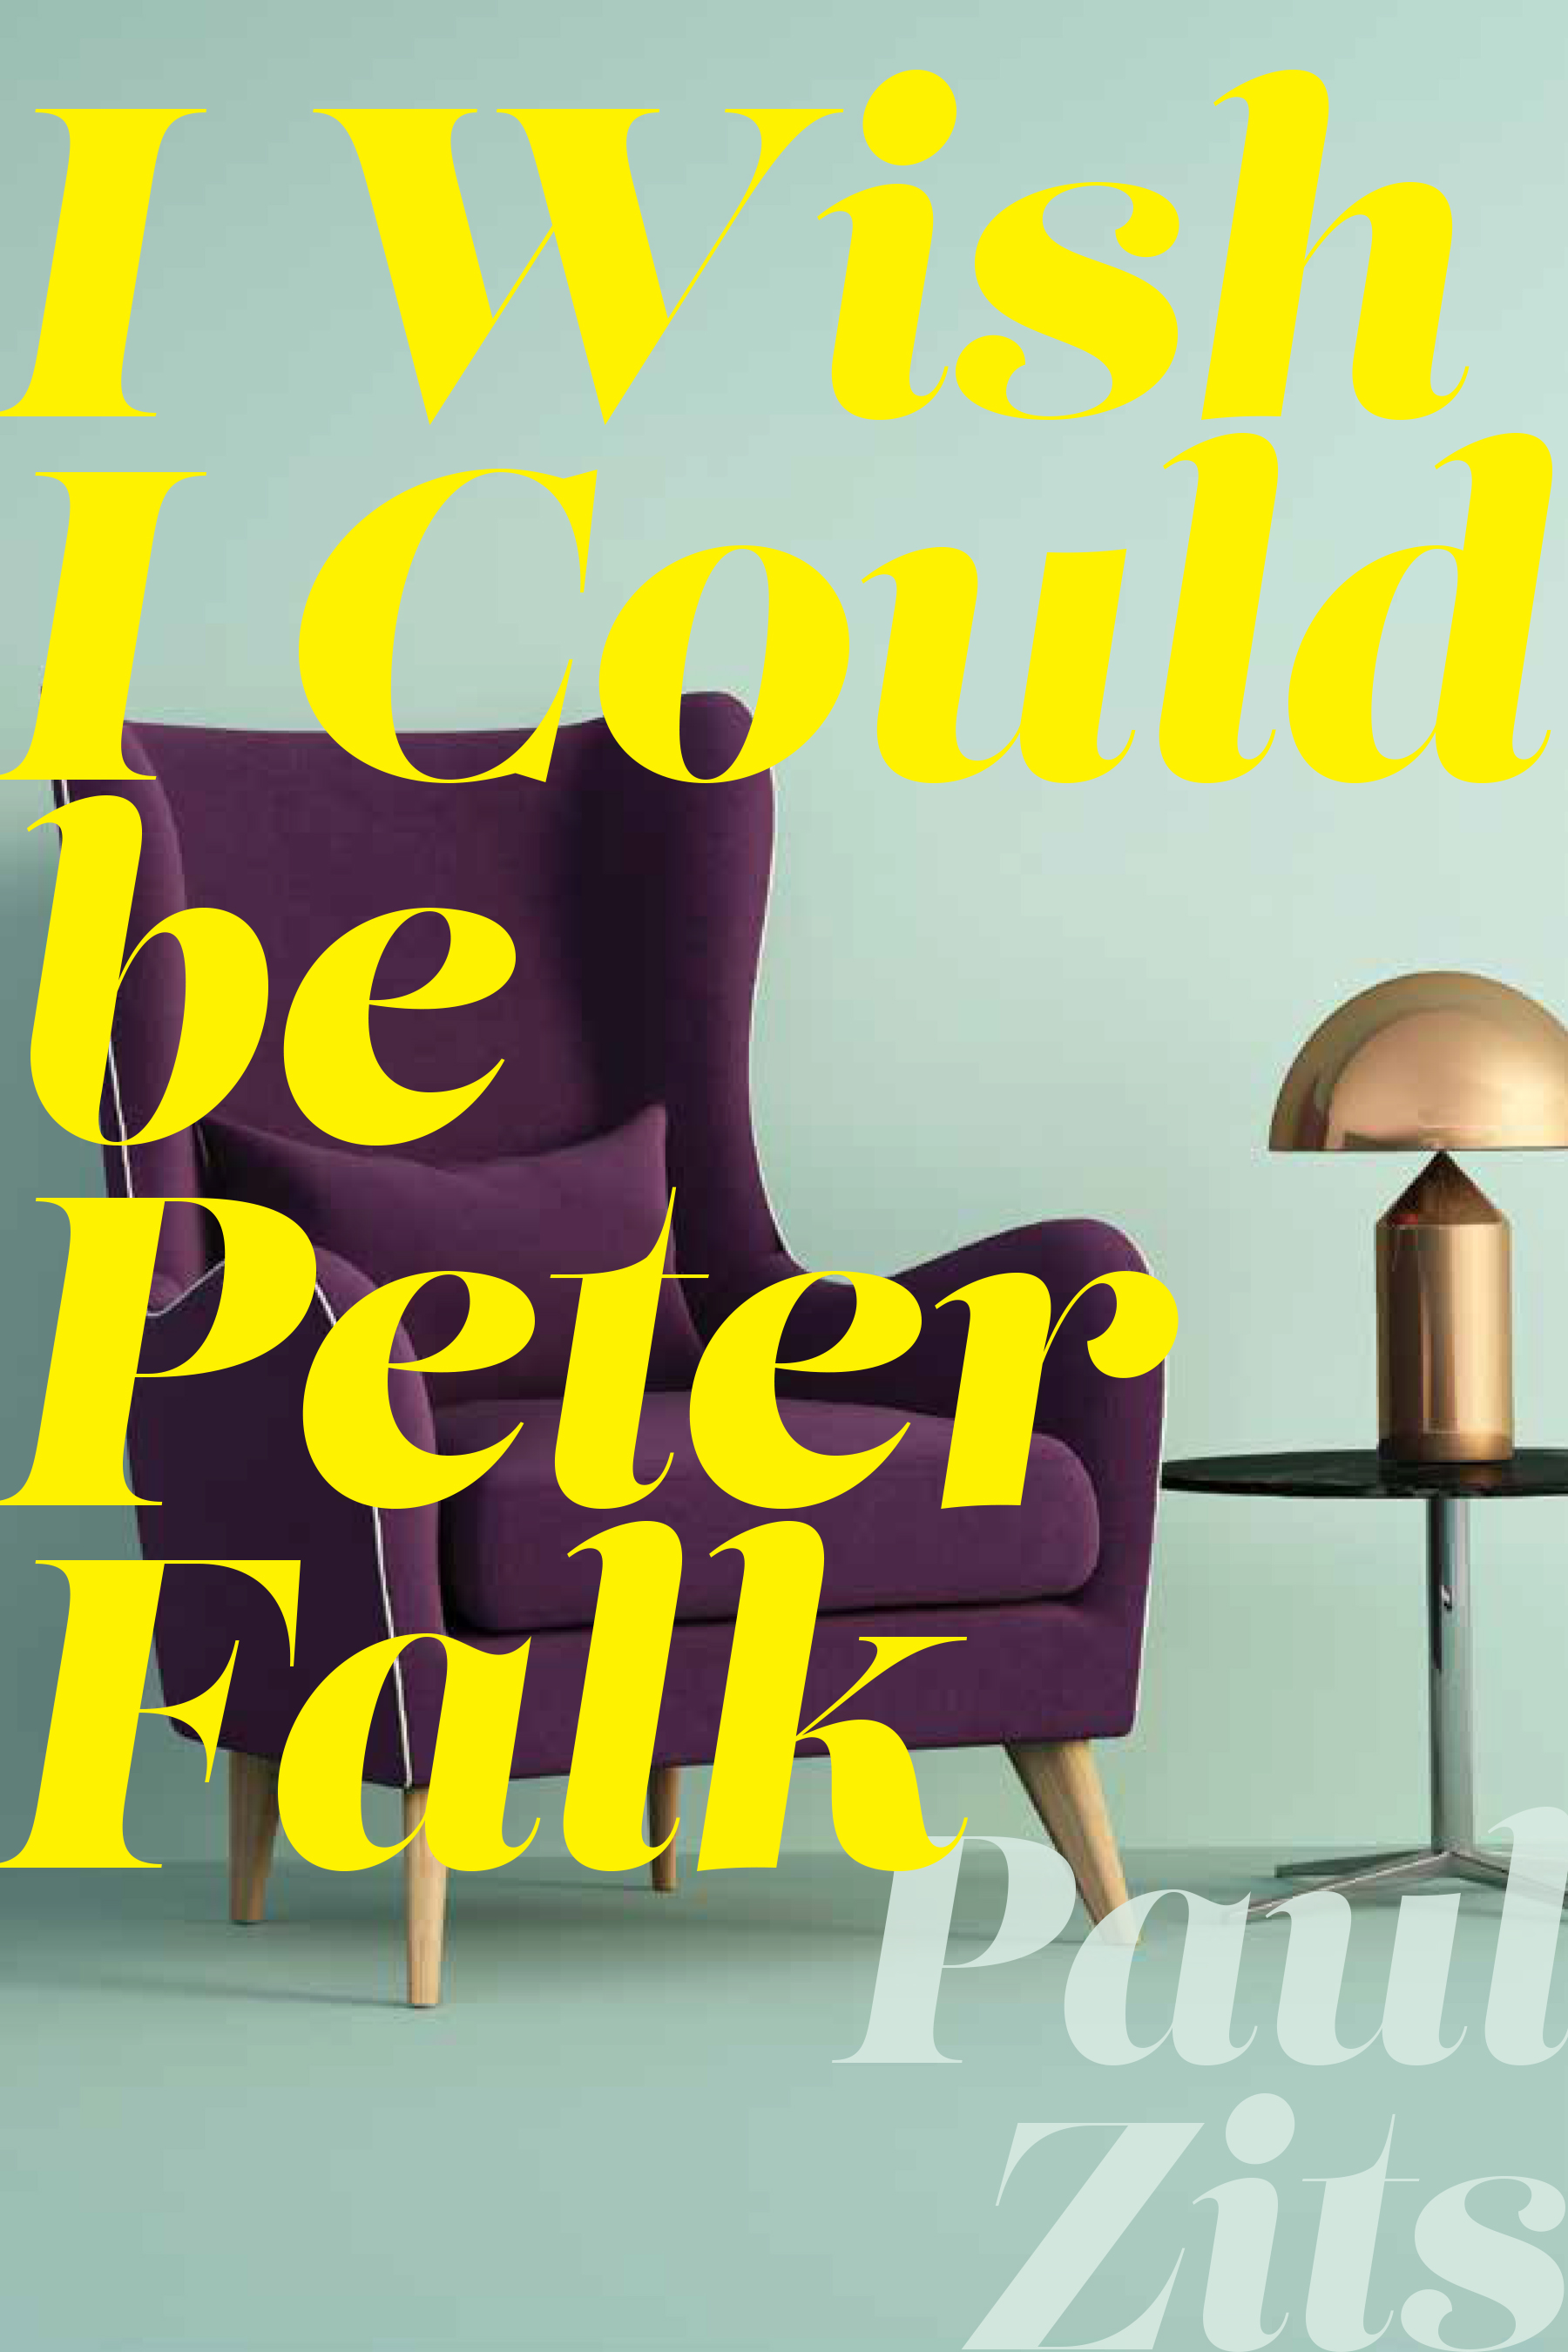 Book Cover Image for: I Wish I Could Be Peter Falk